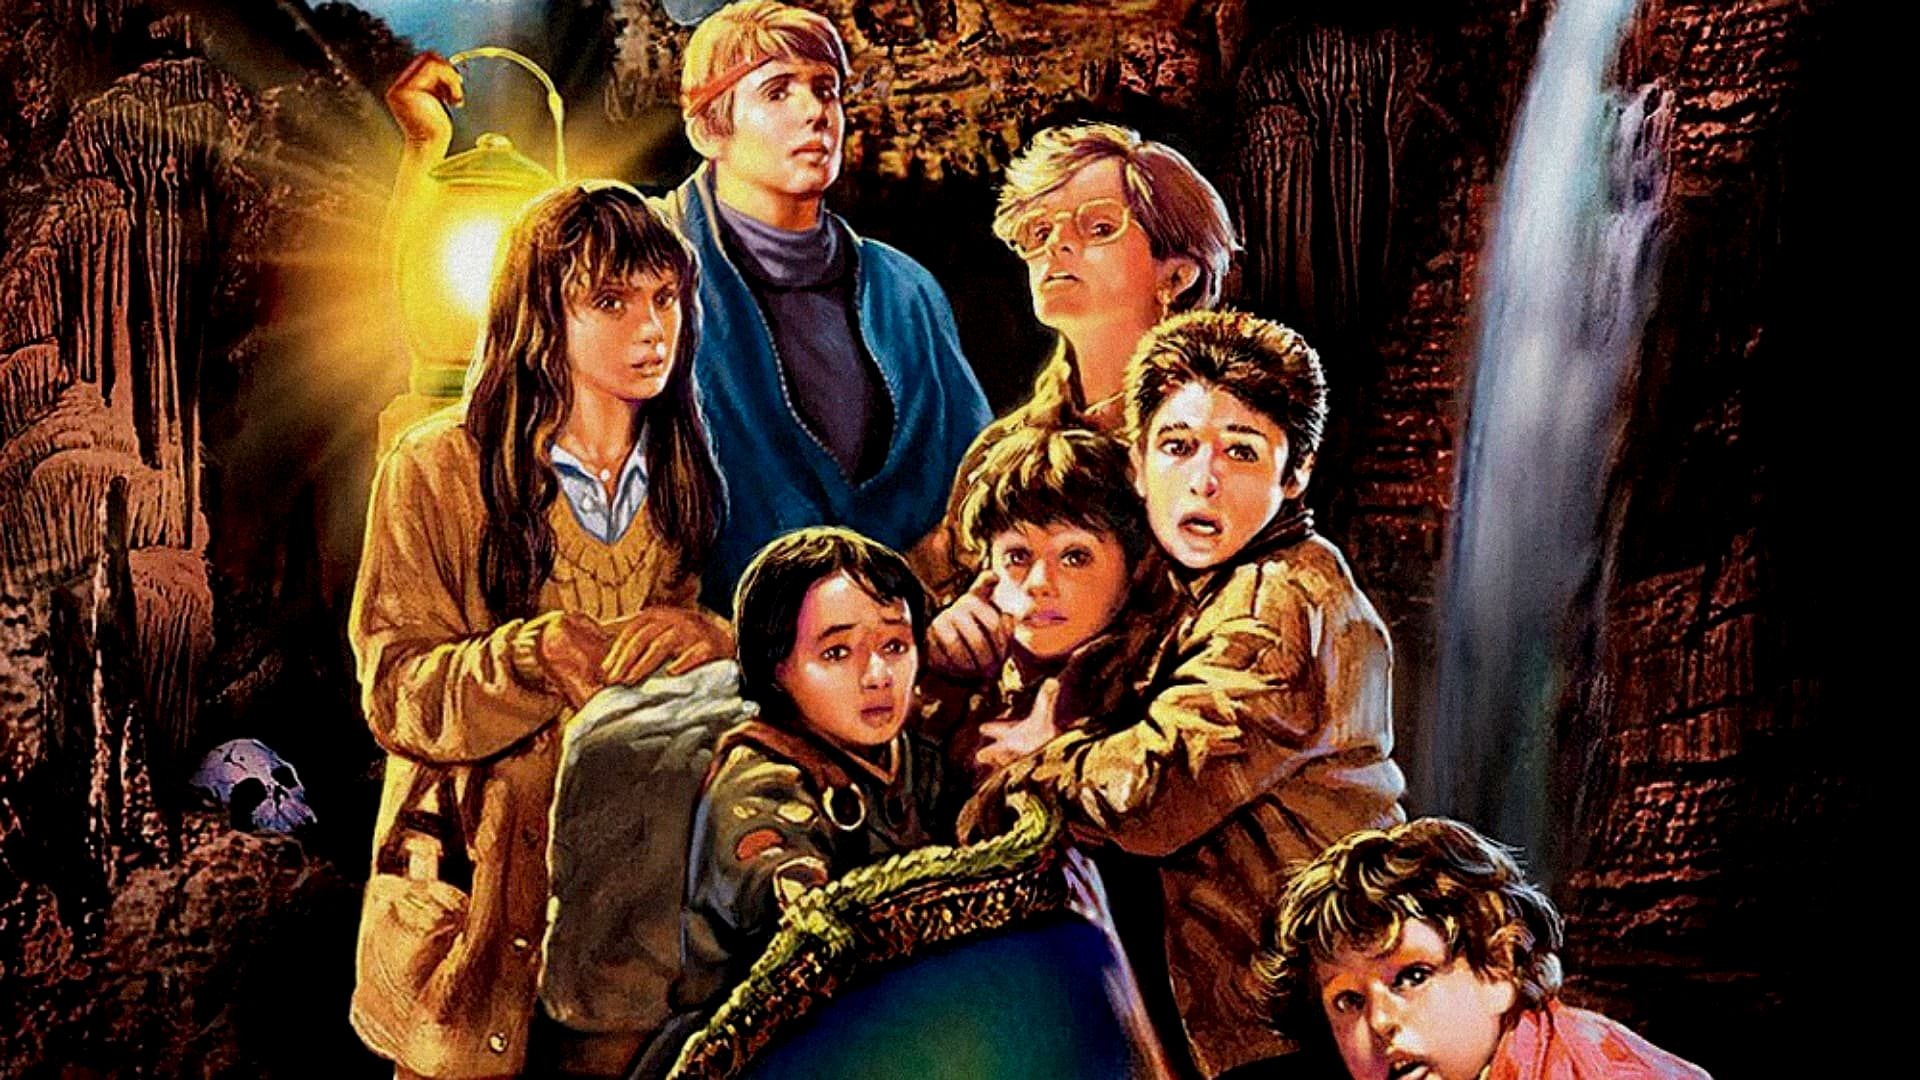 The Goonies background